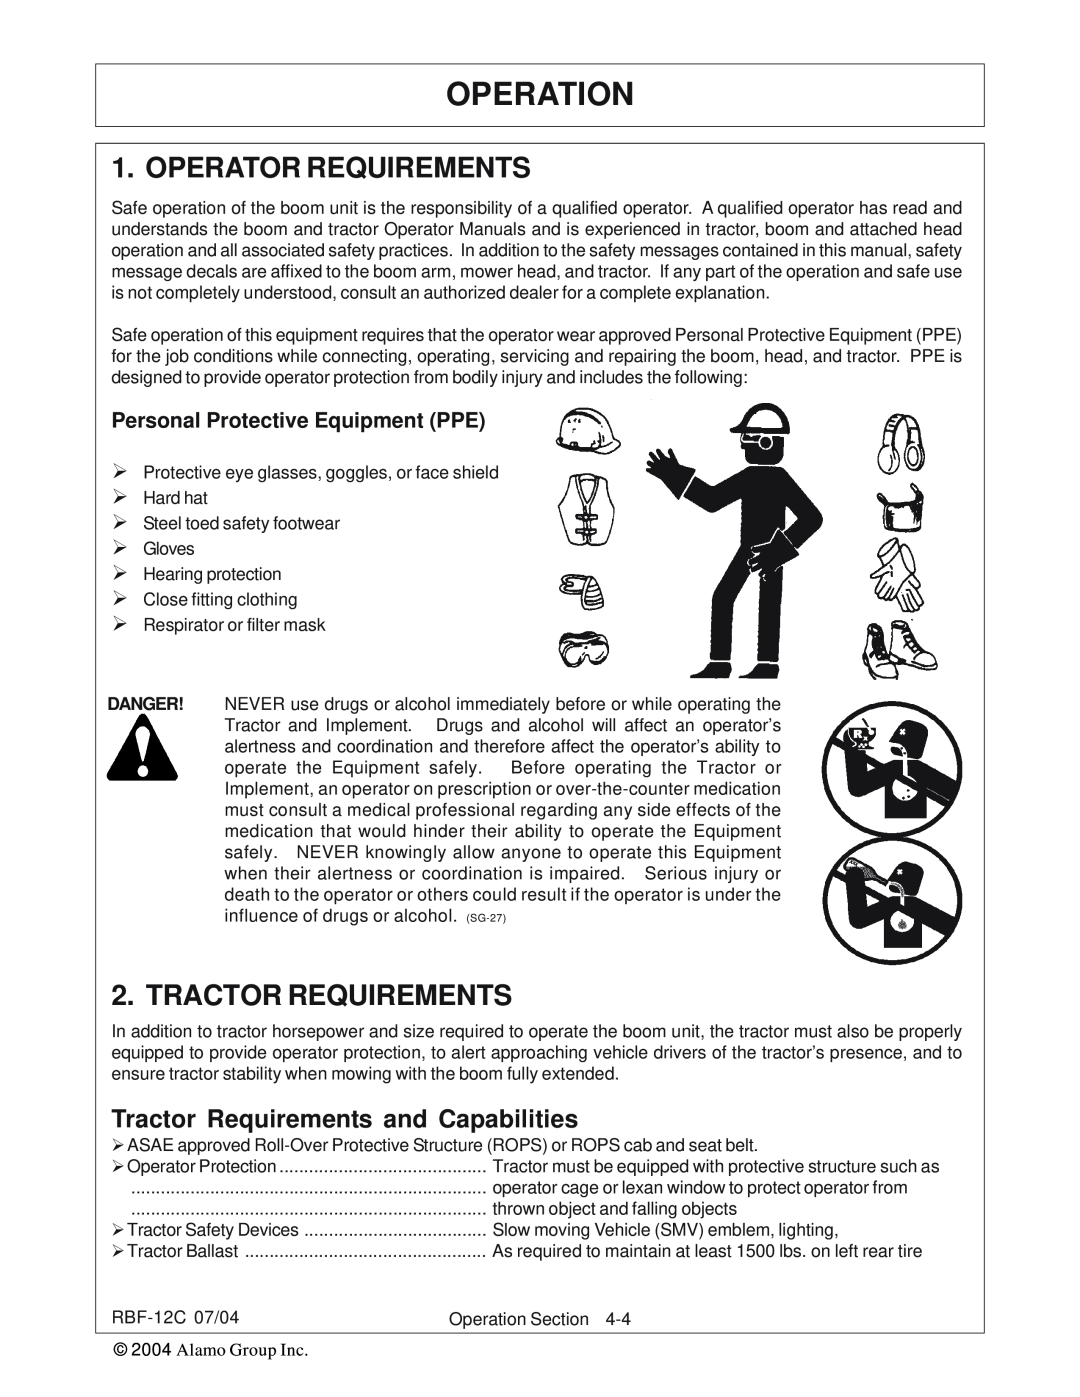 Tiger Products Co., Ltd RBF-12C manual Operator Requirements, Tractor Requirements, Operation 